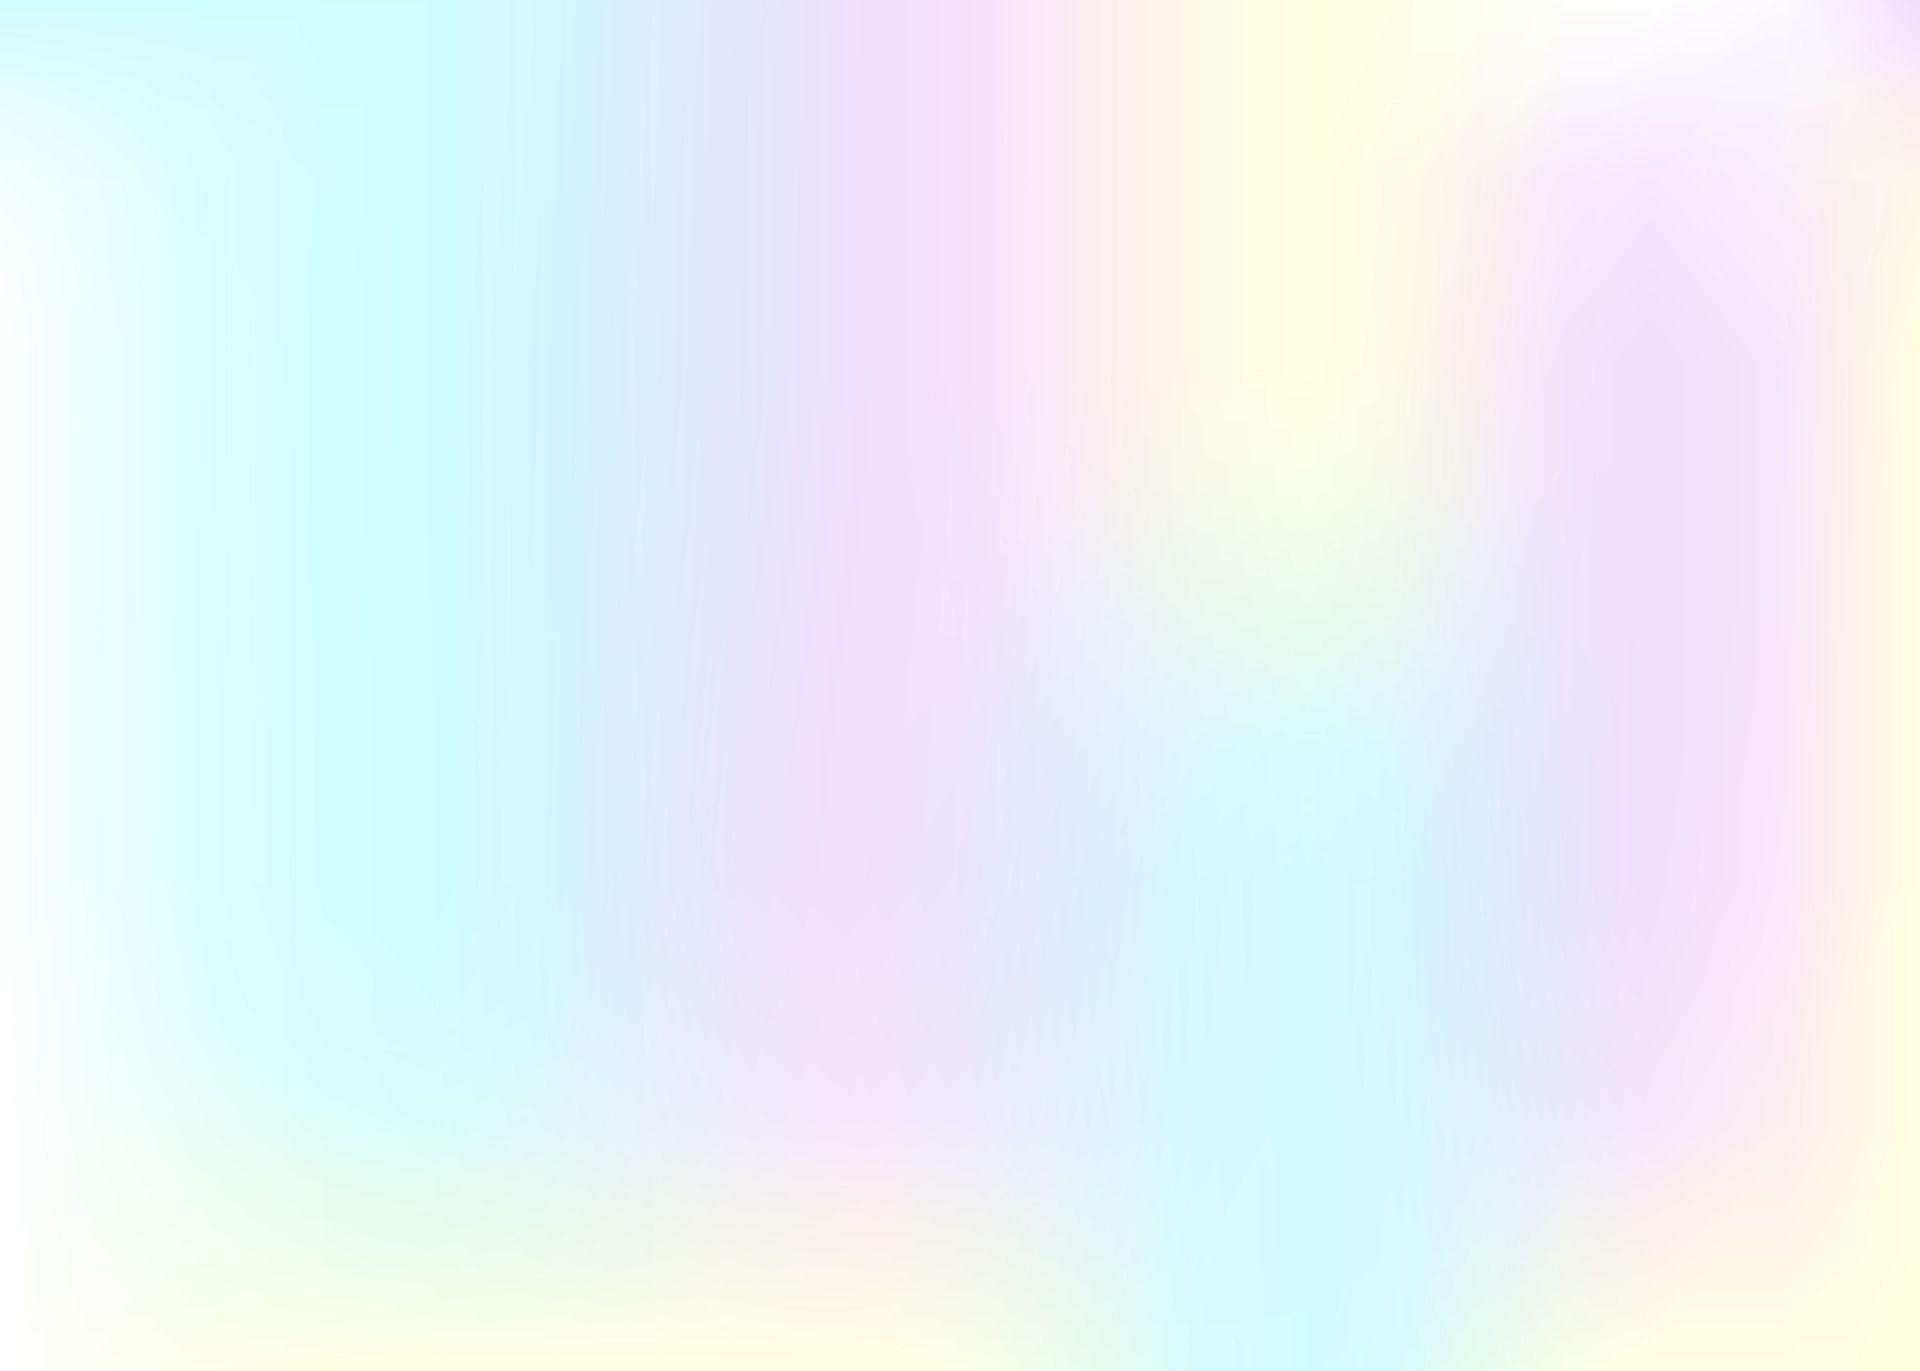 A blurry image of a rainbow gradient - Pastel rainbow